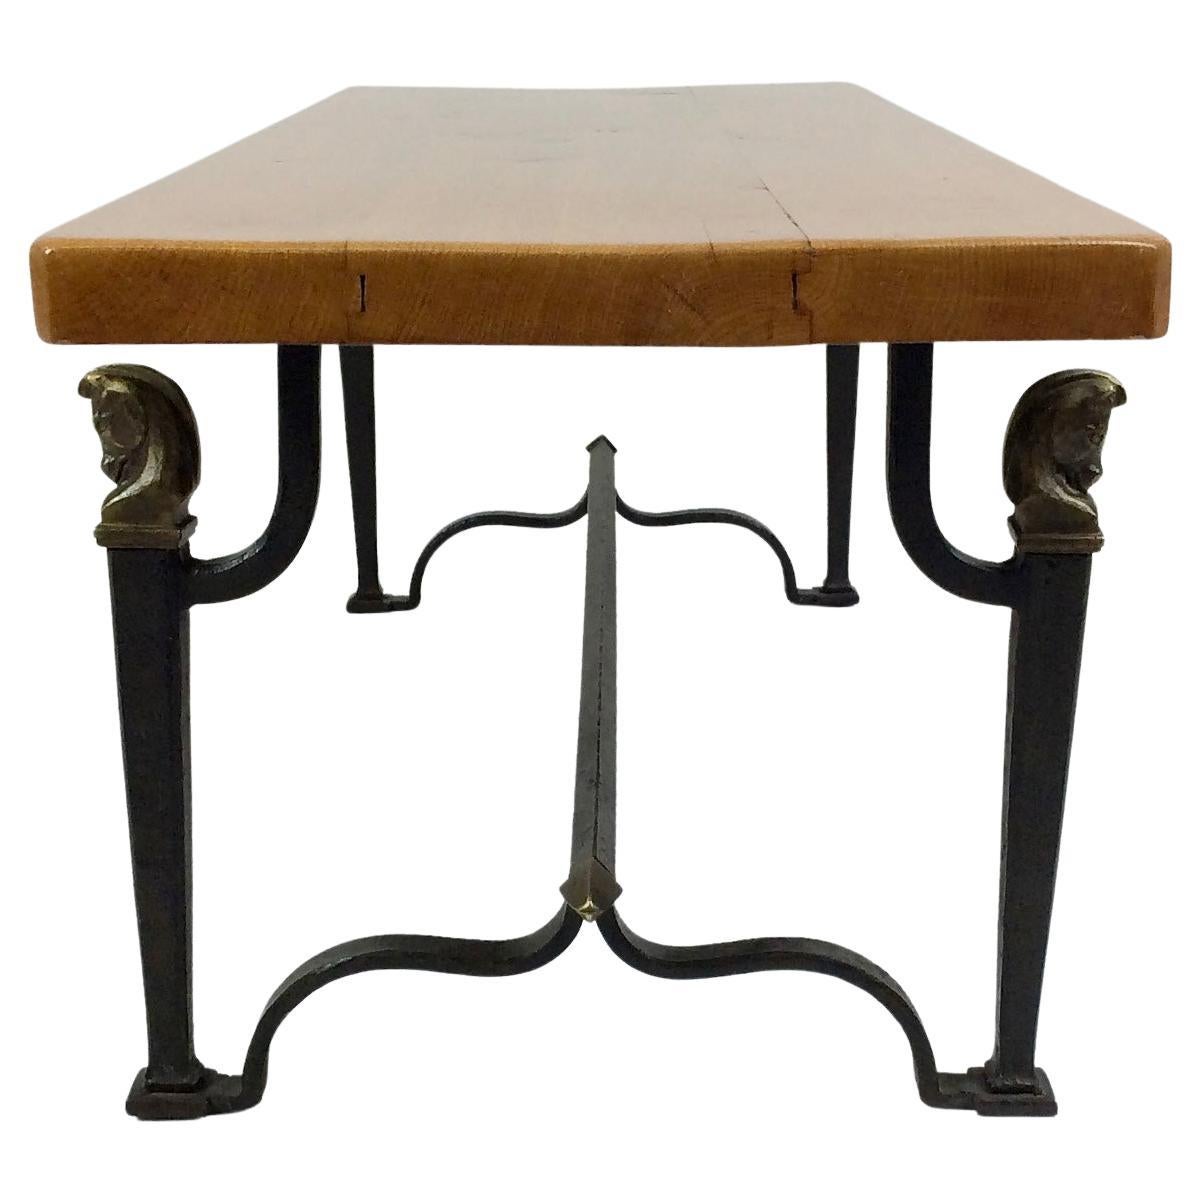 Oak and Wrought Iron Coffee Table, circa 1940, France